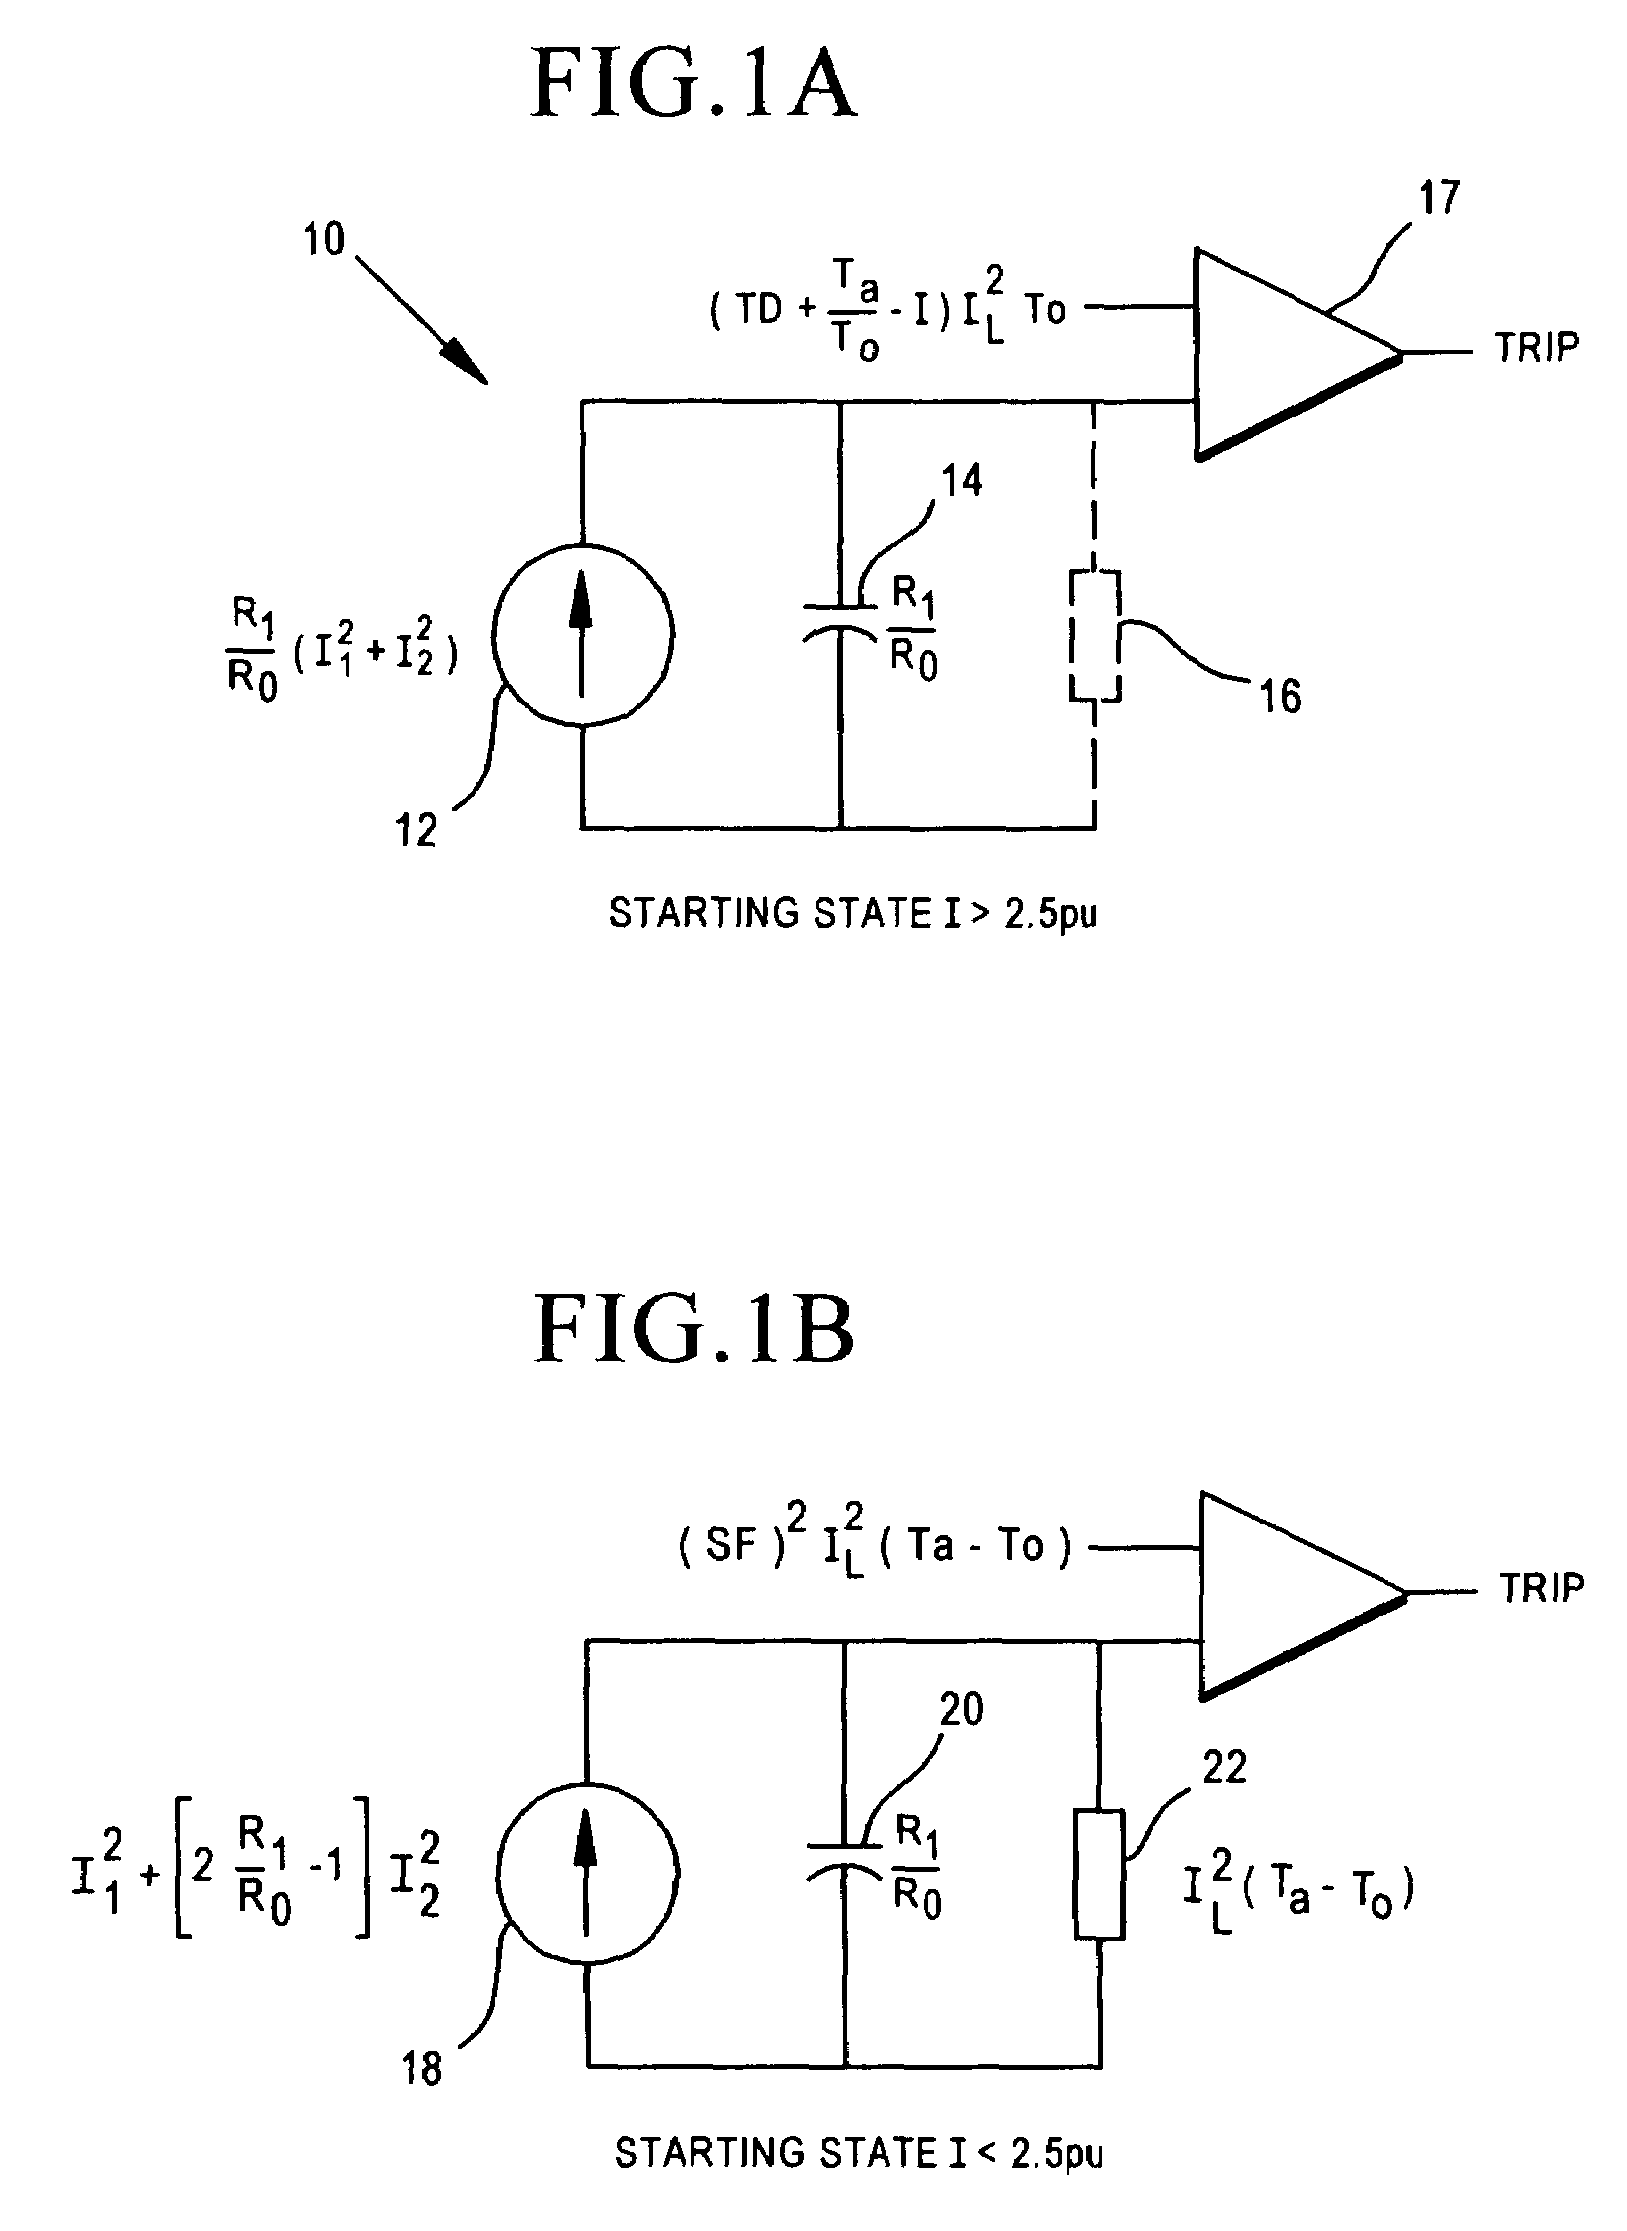 System for transitioning to the trip threshold for the start condition thermal model for a motor protection relay